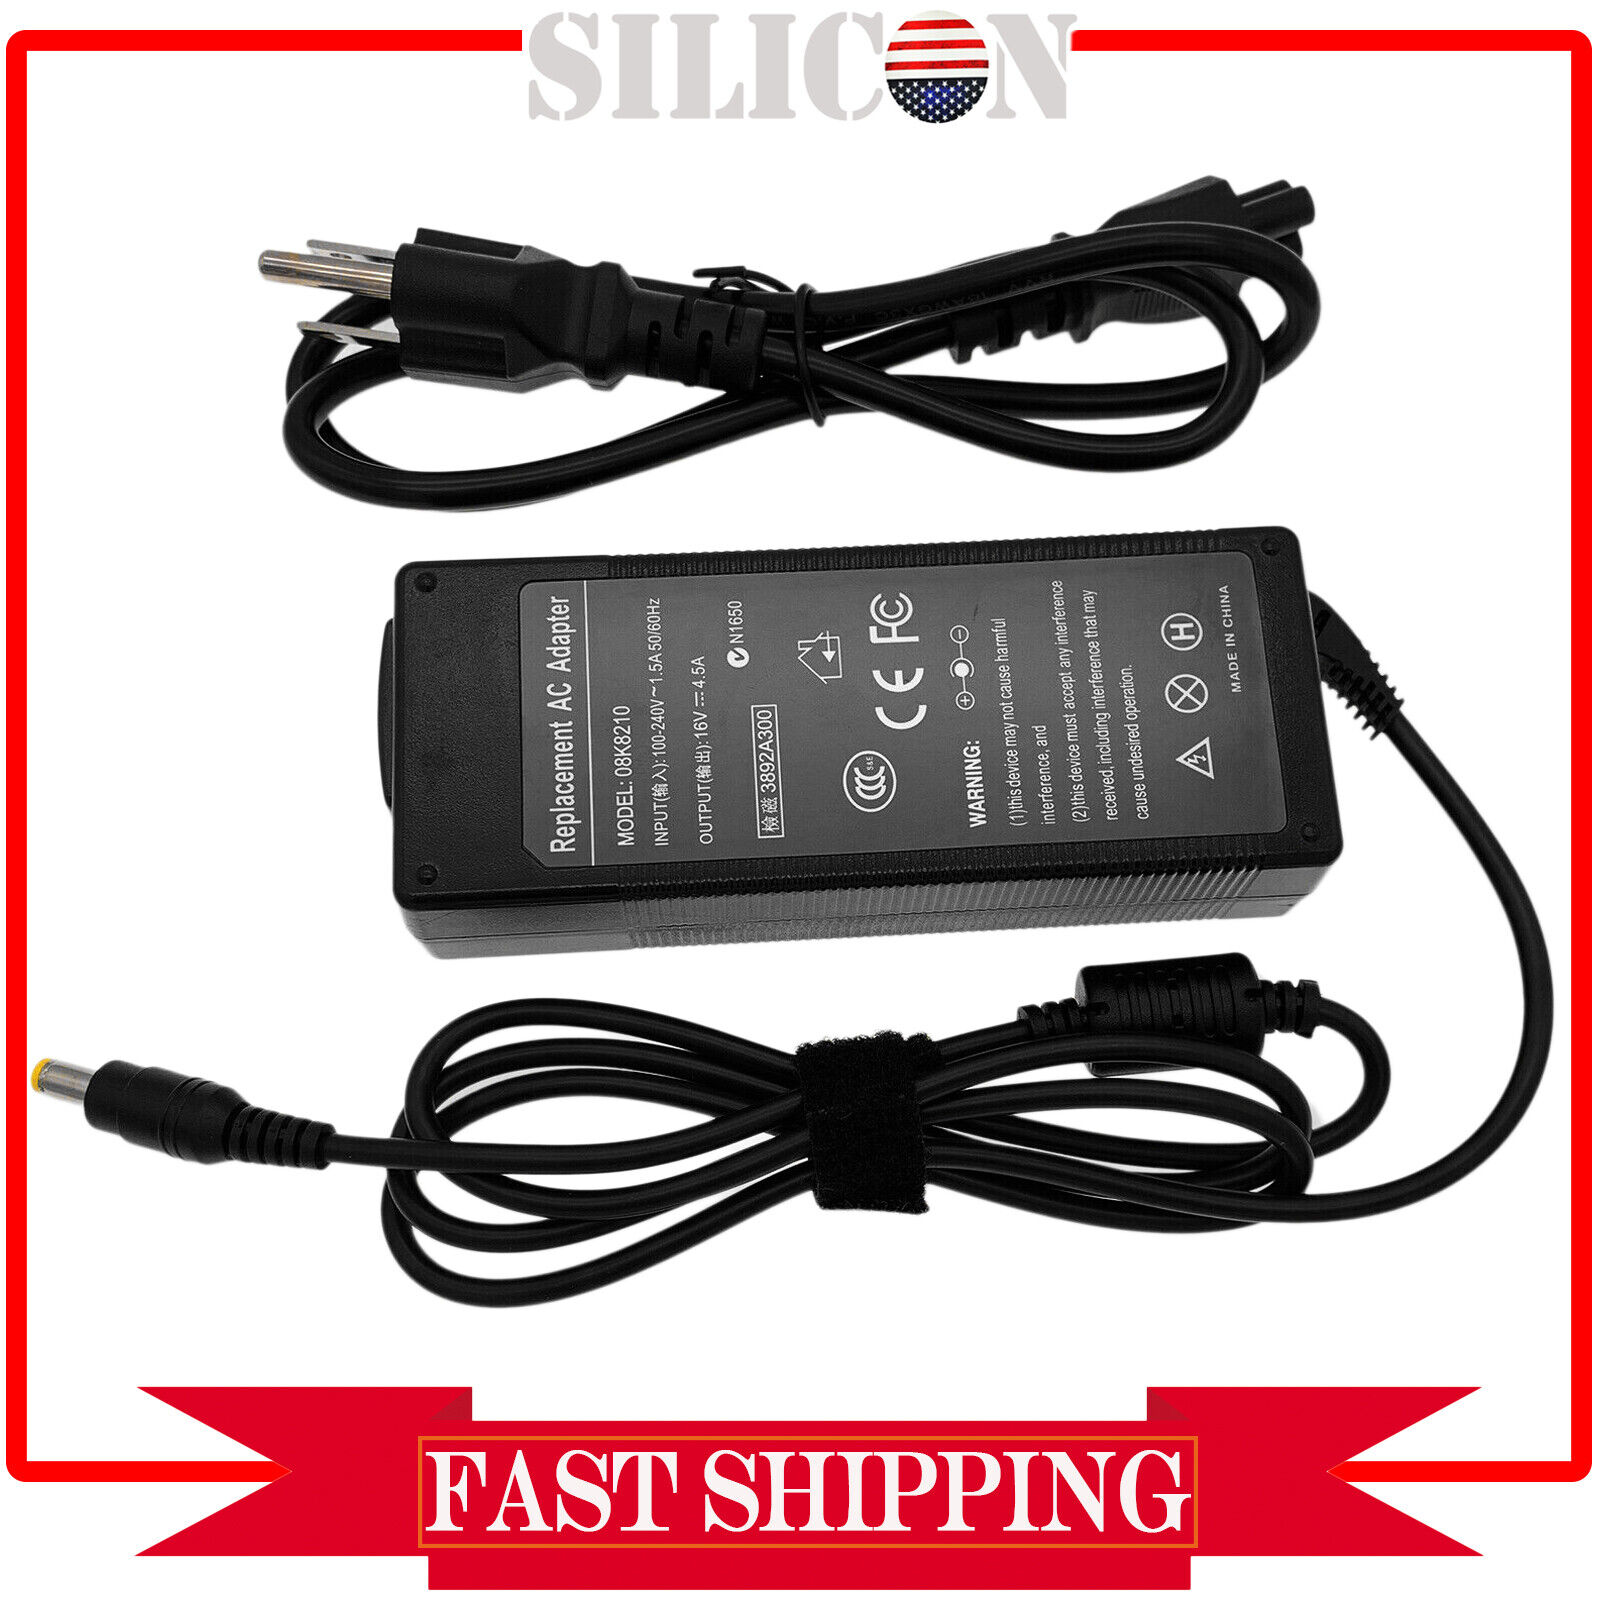 AC Adapter For Panasonic ToughBook CF-30 CF-73 Battery Charger Power Supply Cord